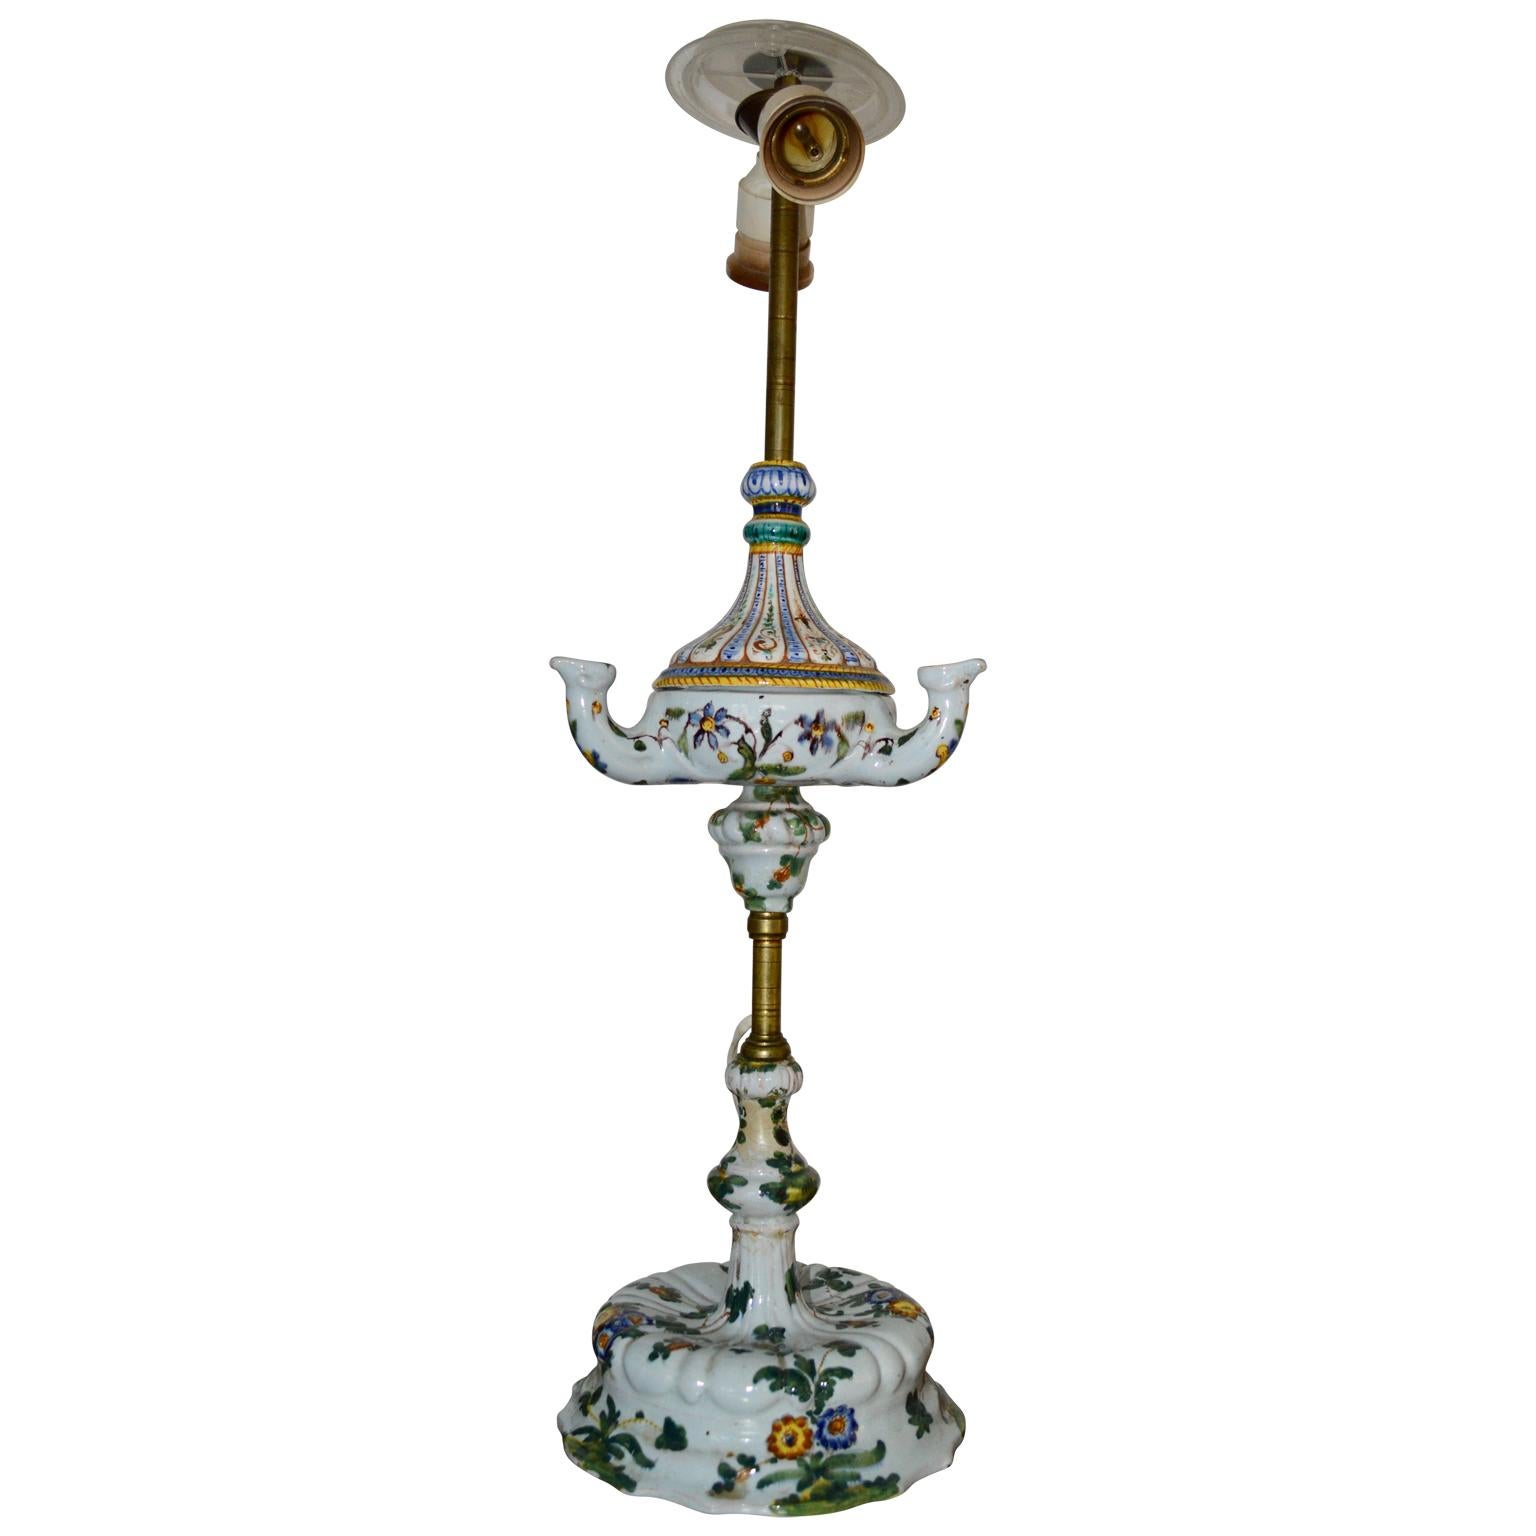 This 19th century faience table lamp is converted from an old oil lamp.